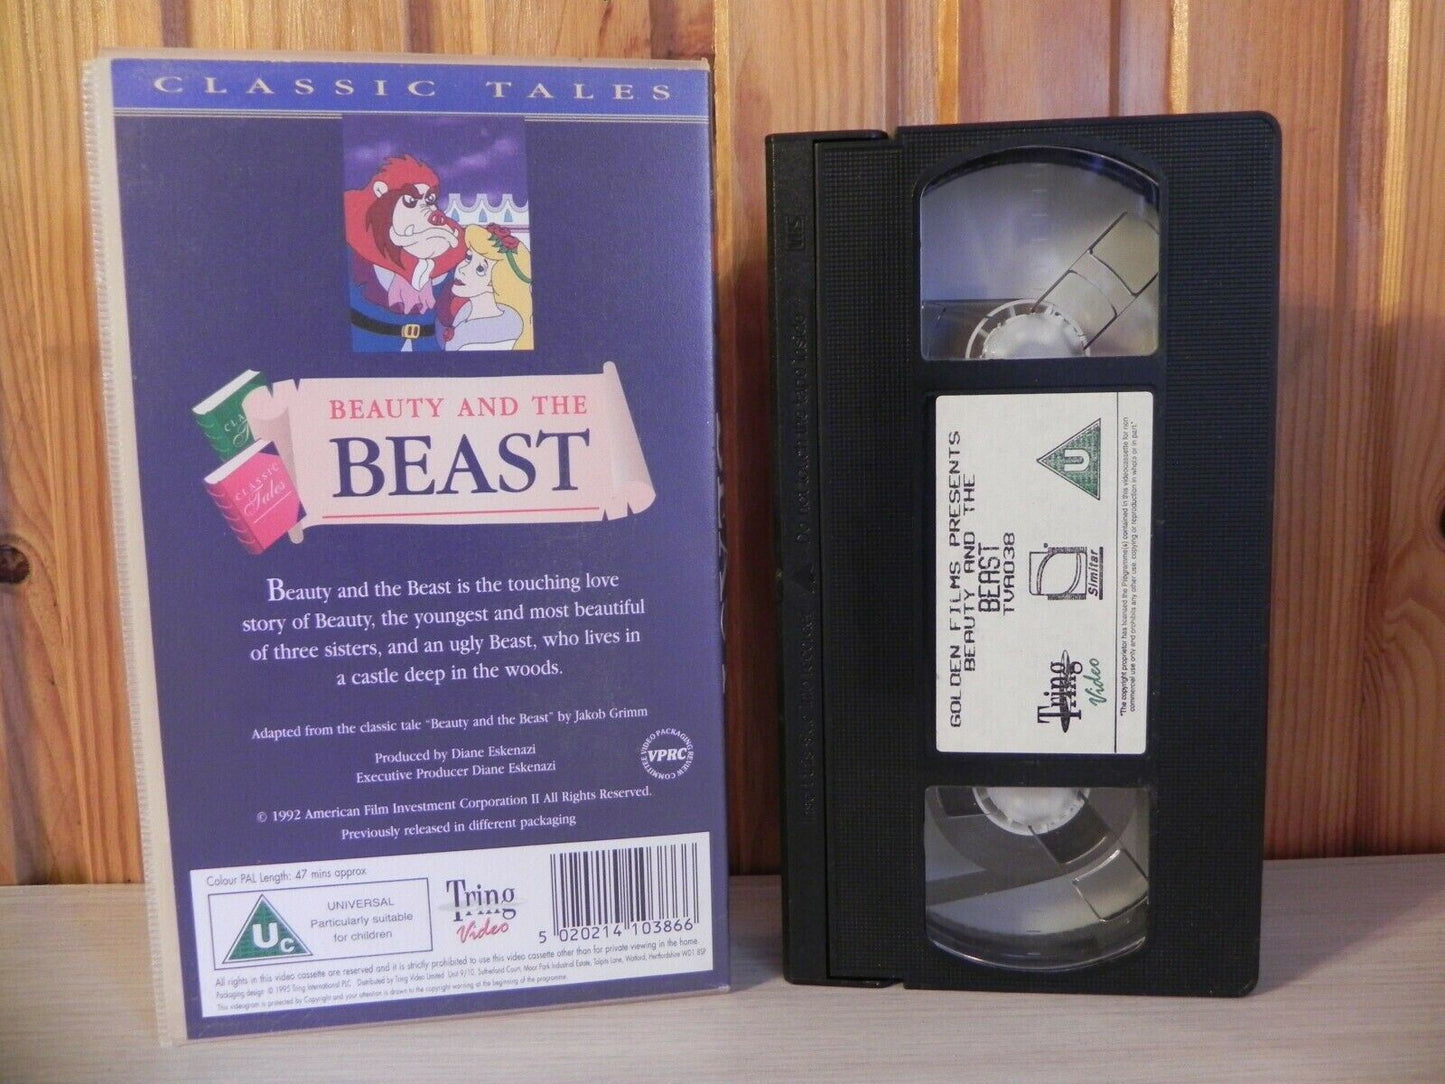 Beauty And The Beast: By Jakob Grimm - Animated Classic Tale - Kids - Pal VHS-